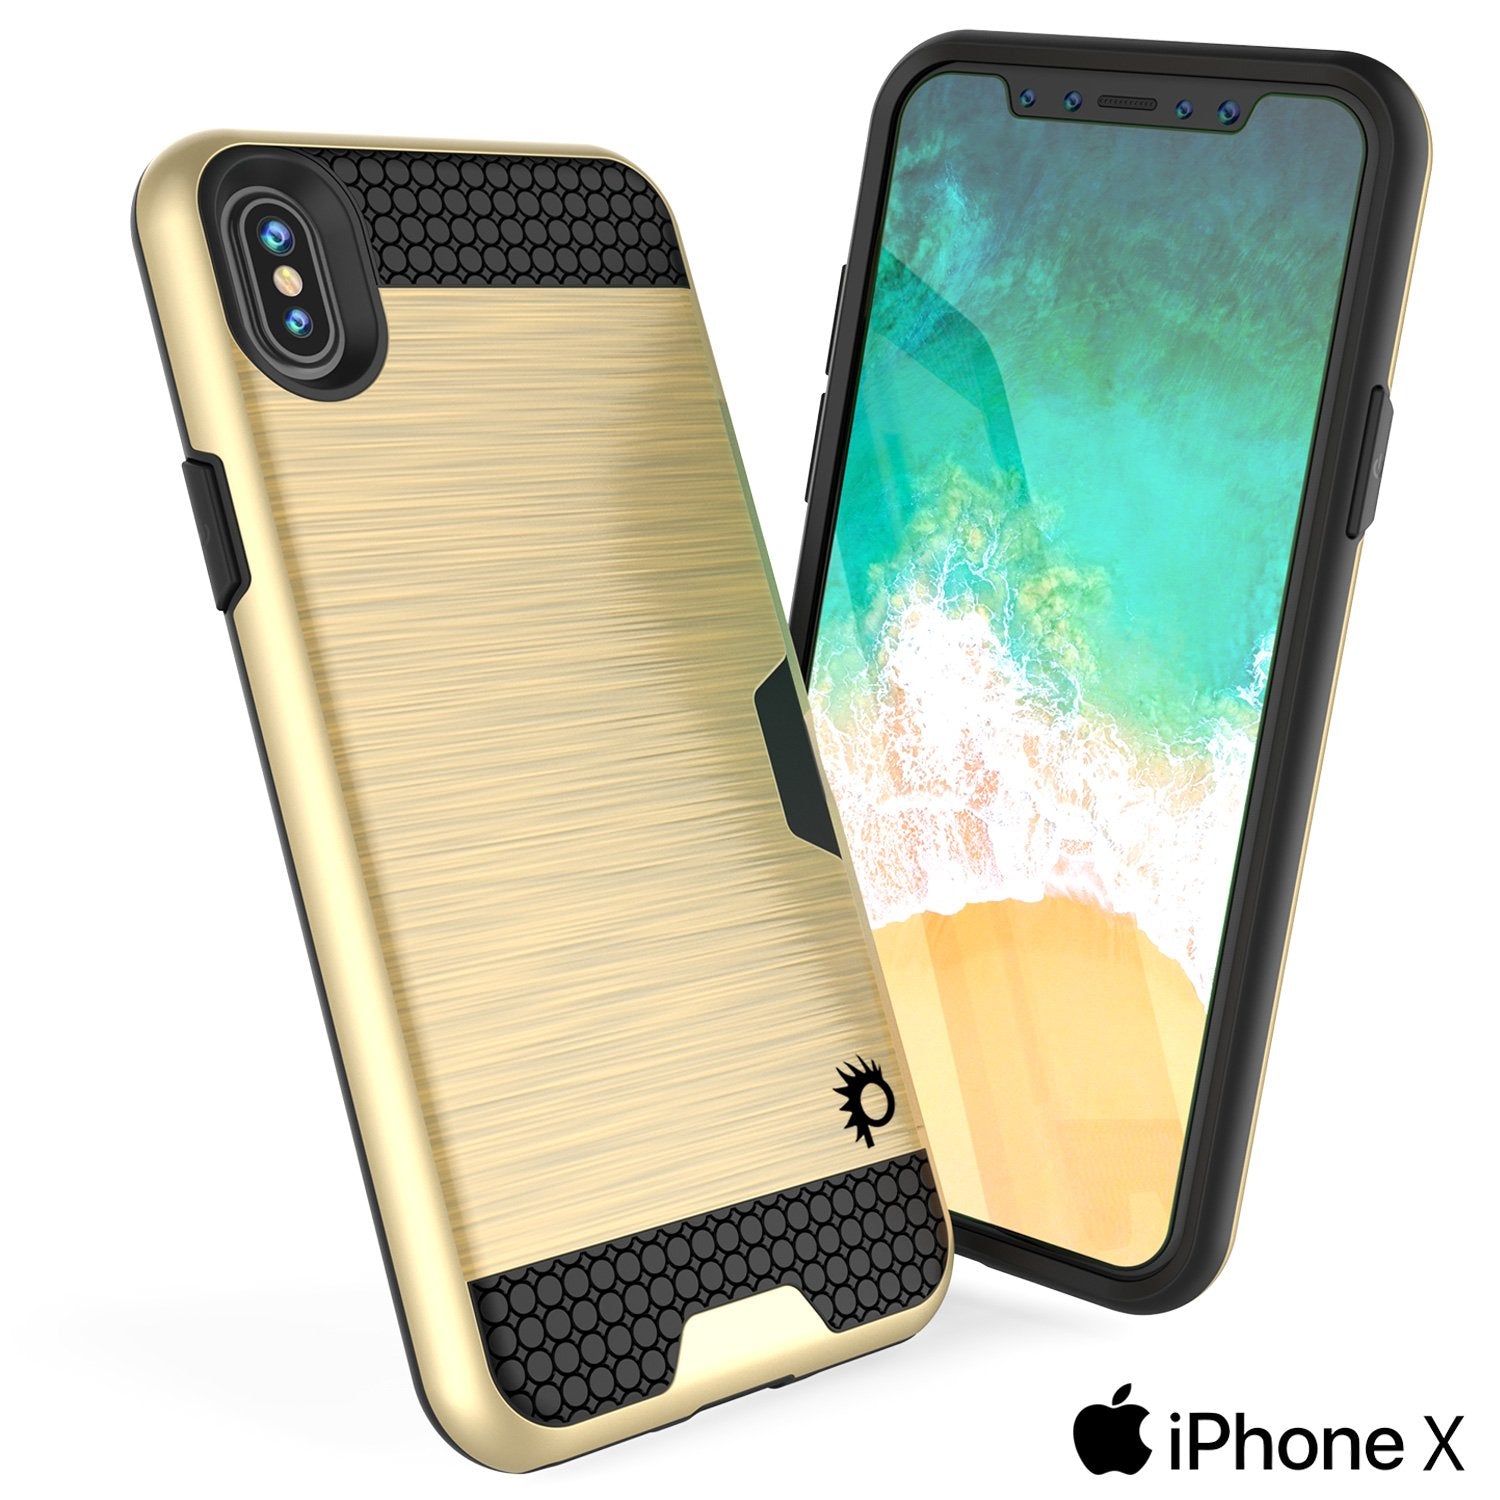 iPhone X Case, PUNKcase [SLOT Series] Slim Fit Dual-Layer Armor Cover [Gold]